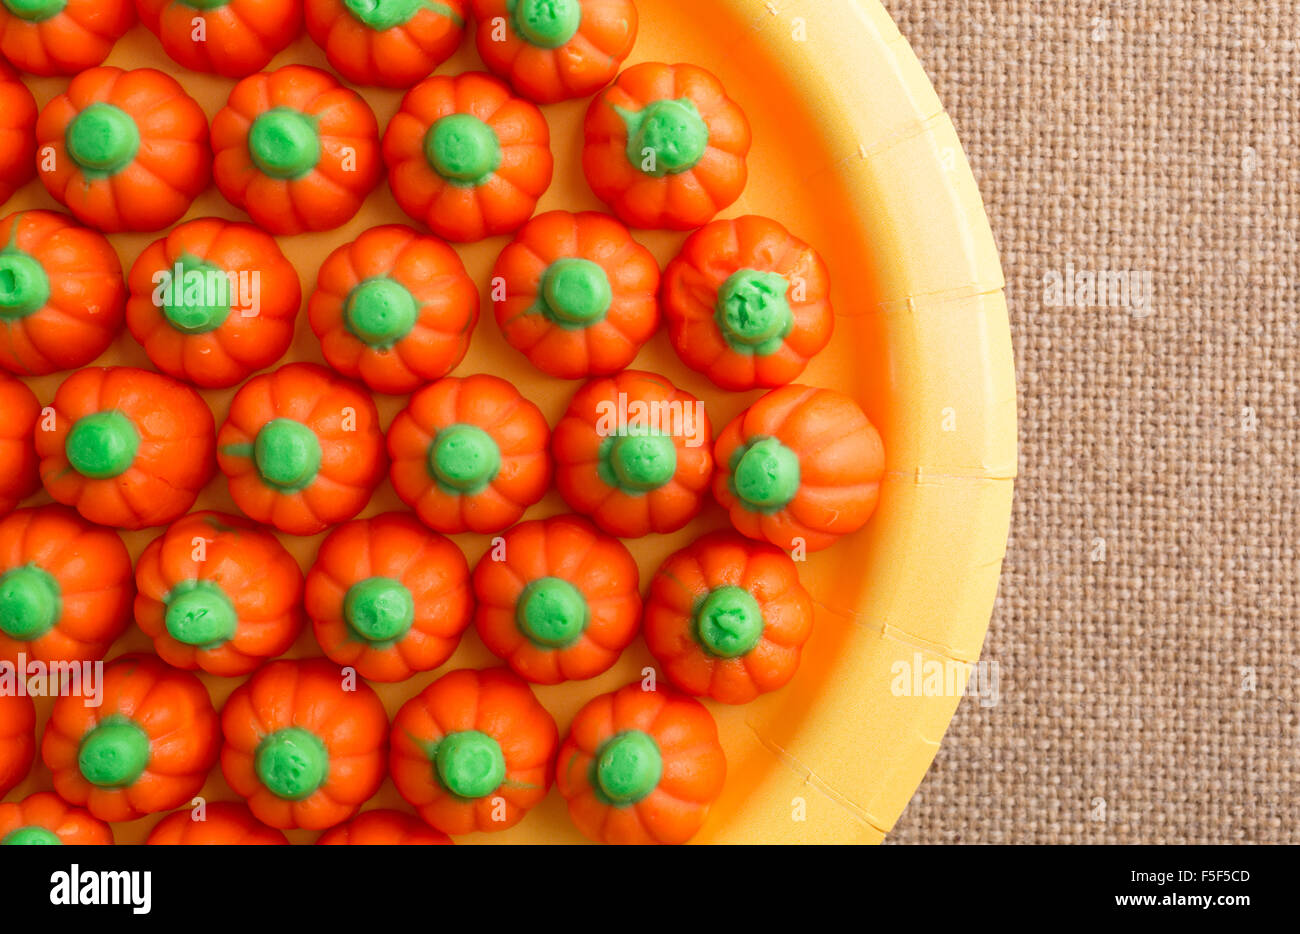 Top close view of orange and green Halloween pumpkin candy on a yellow paper plate atop a burlap tablecloth Stock Photo